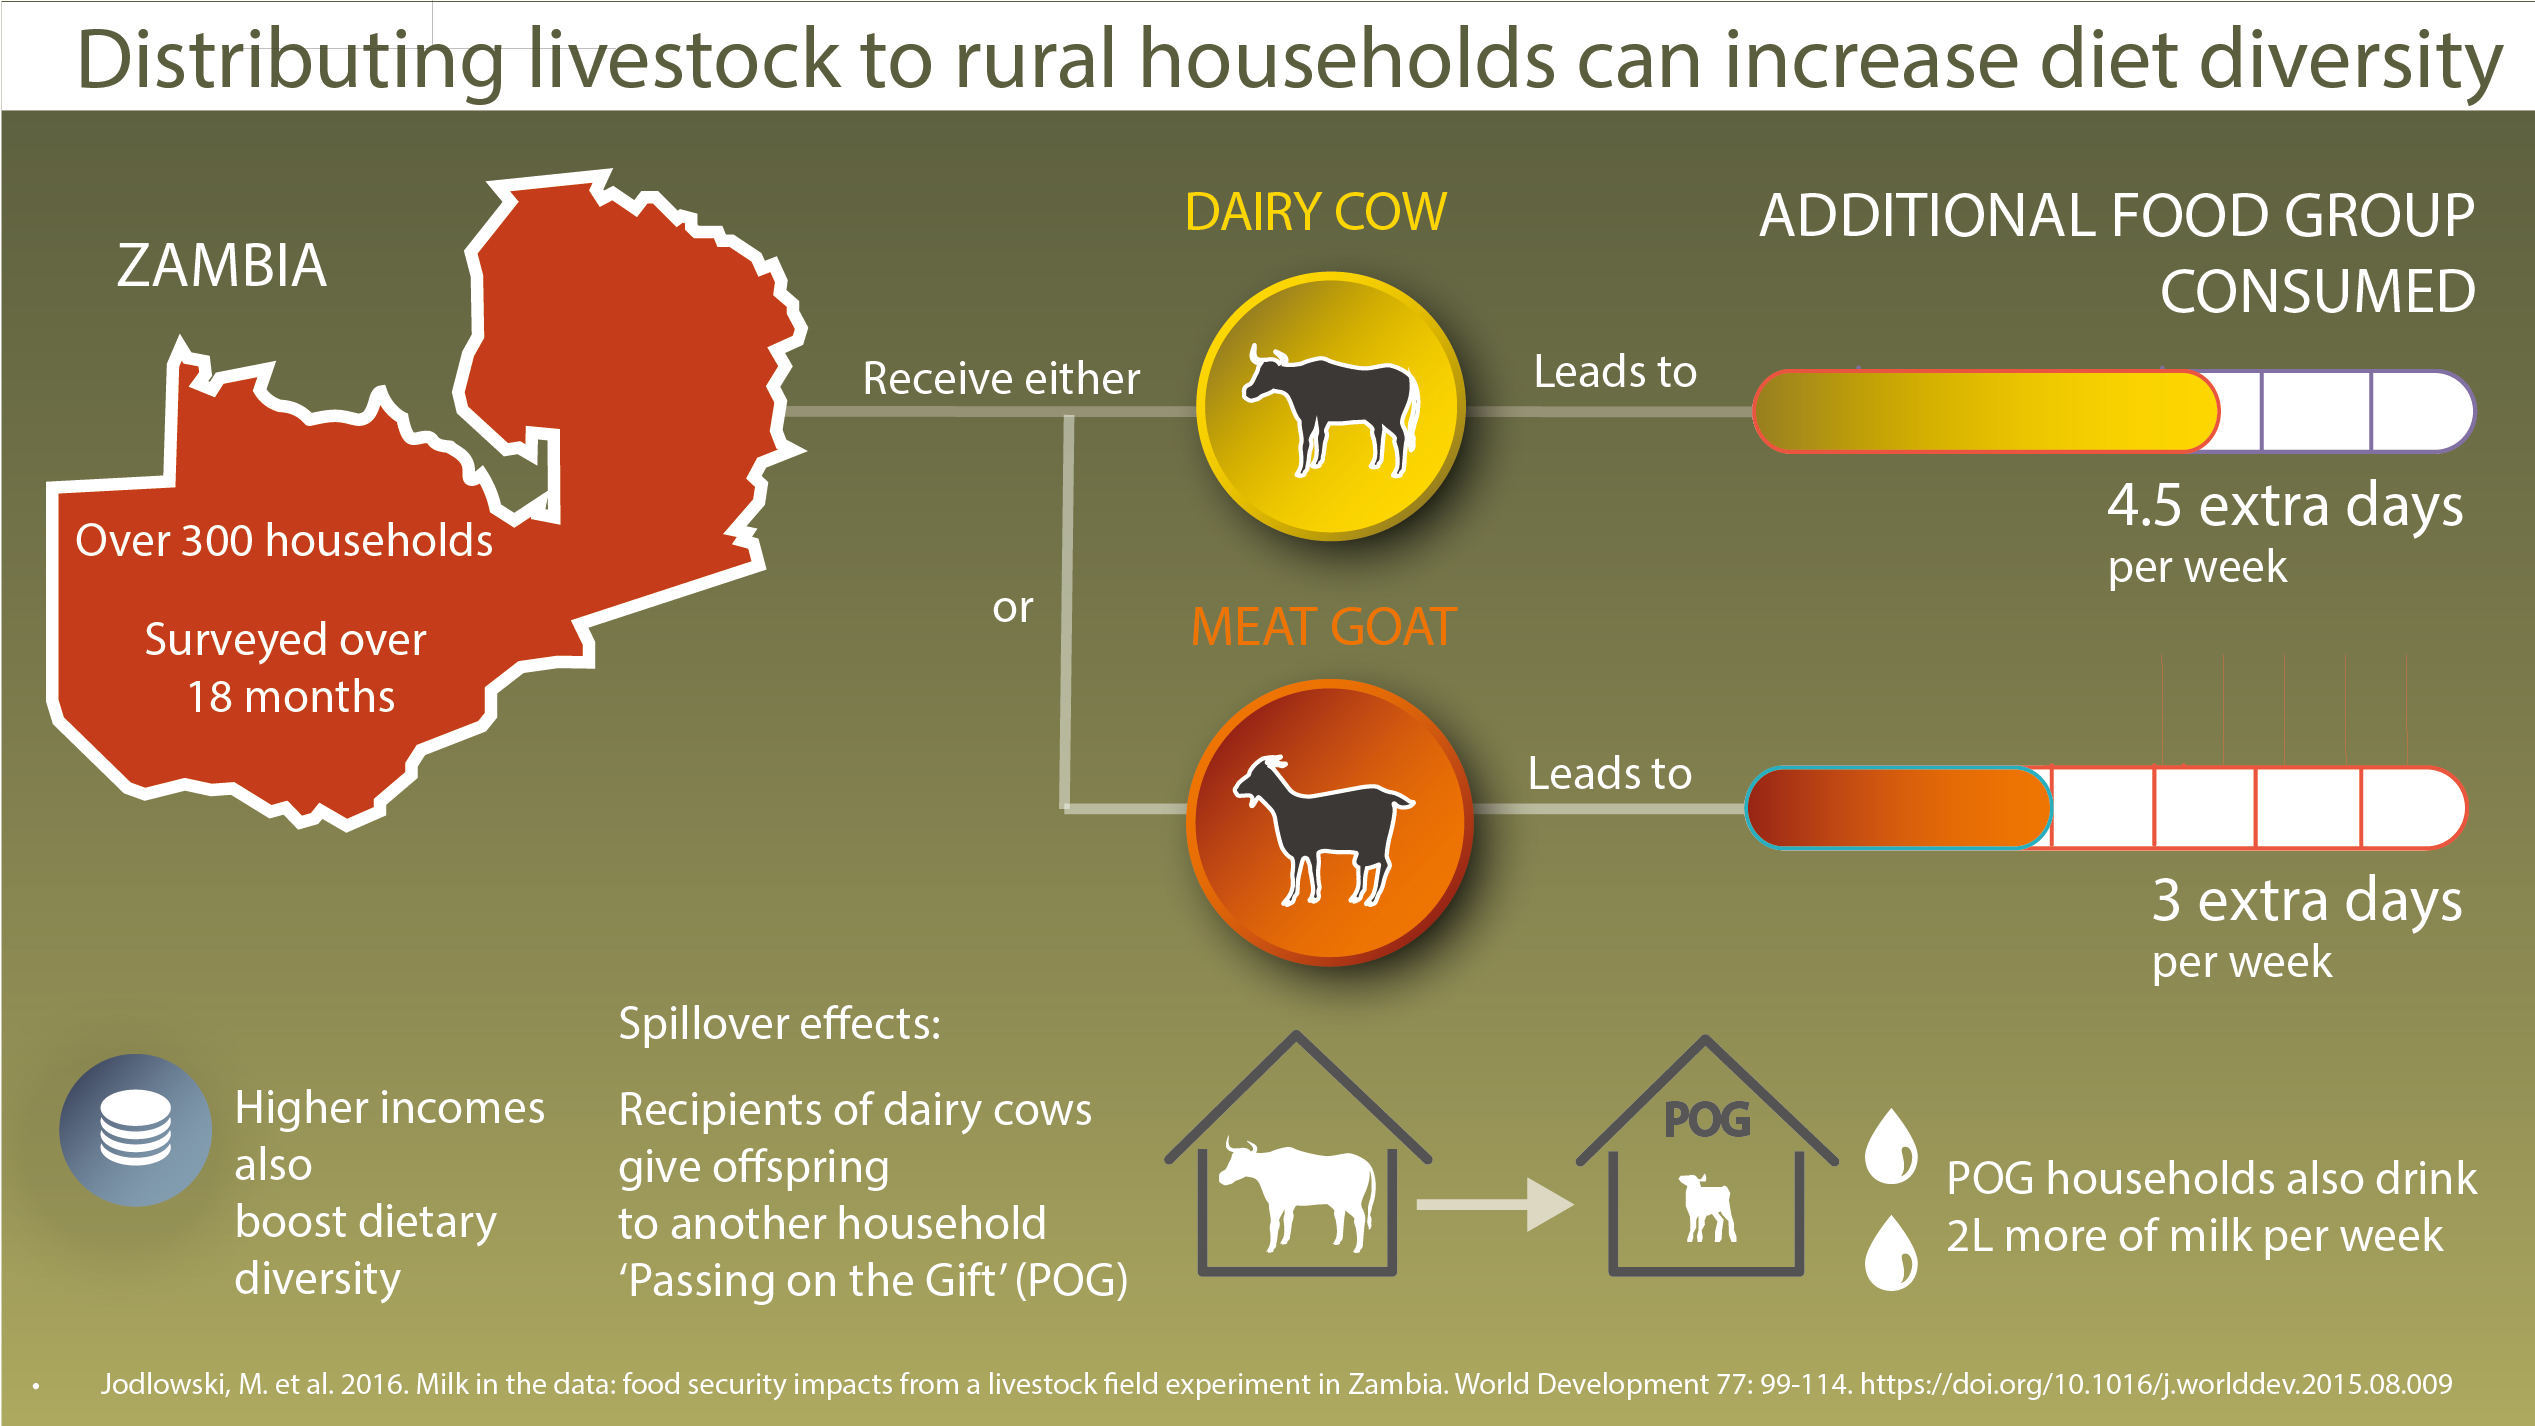 Distributing livestock to rural households can increase diet diversity